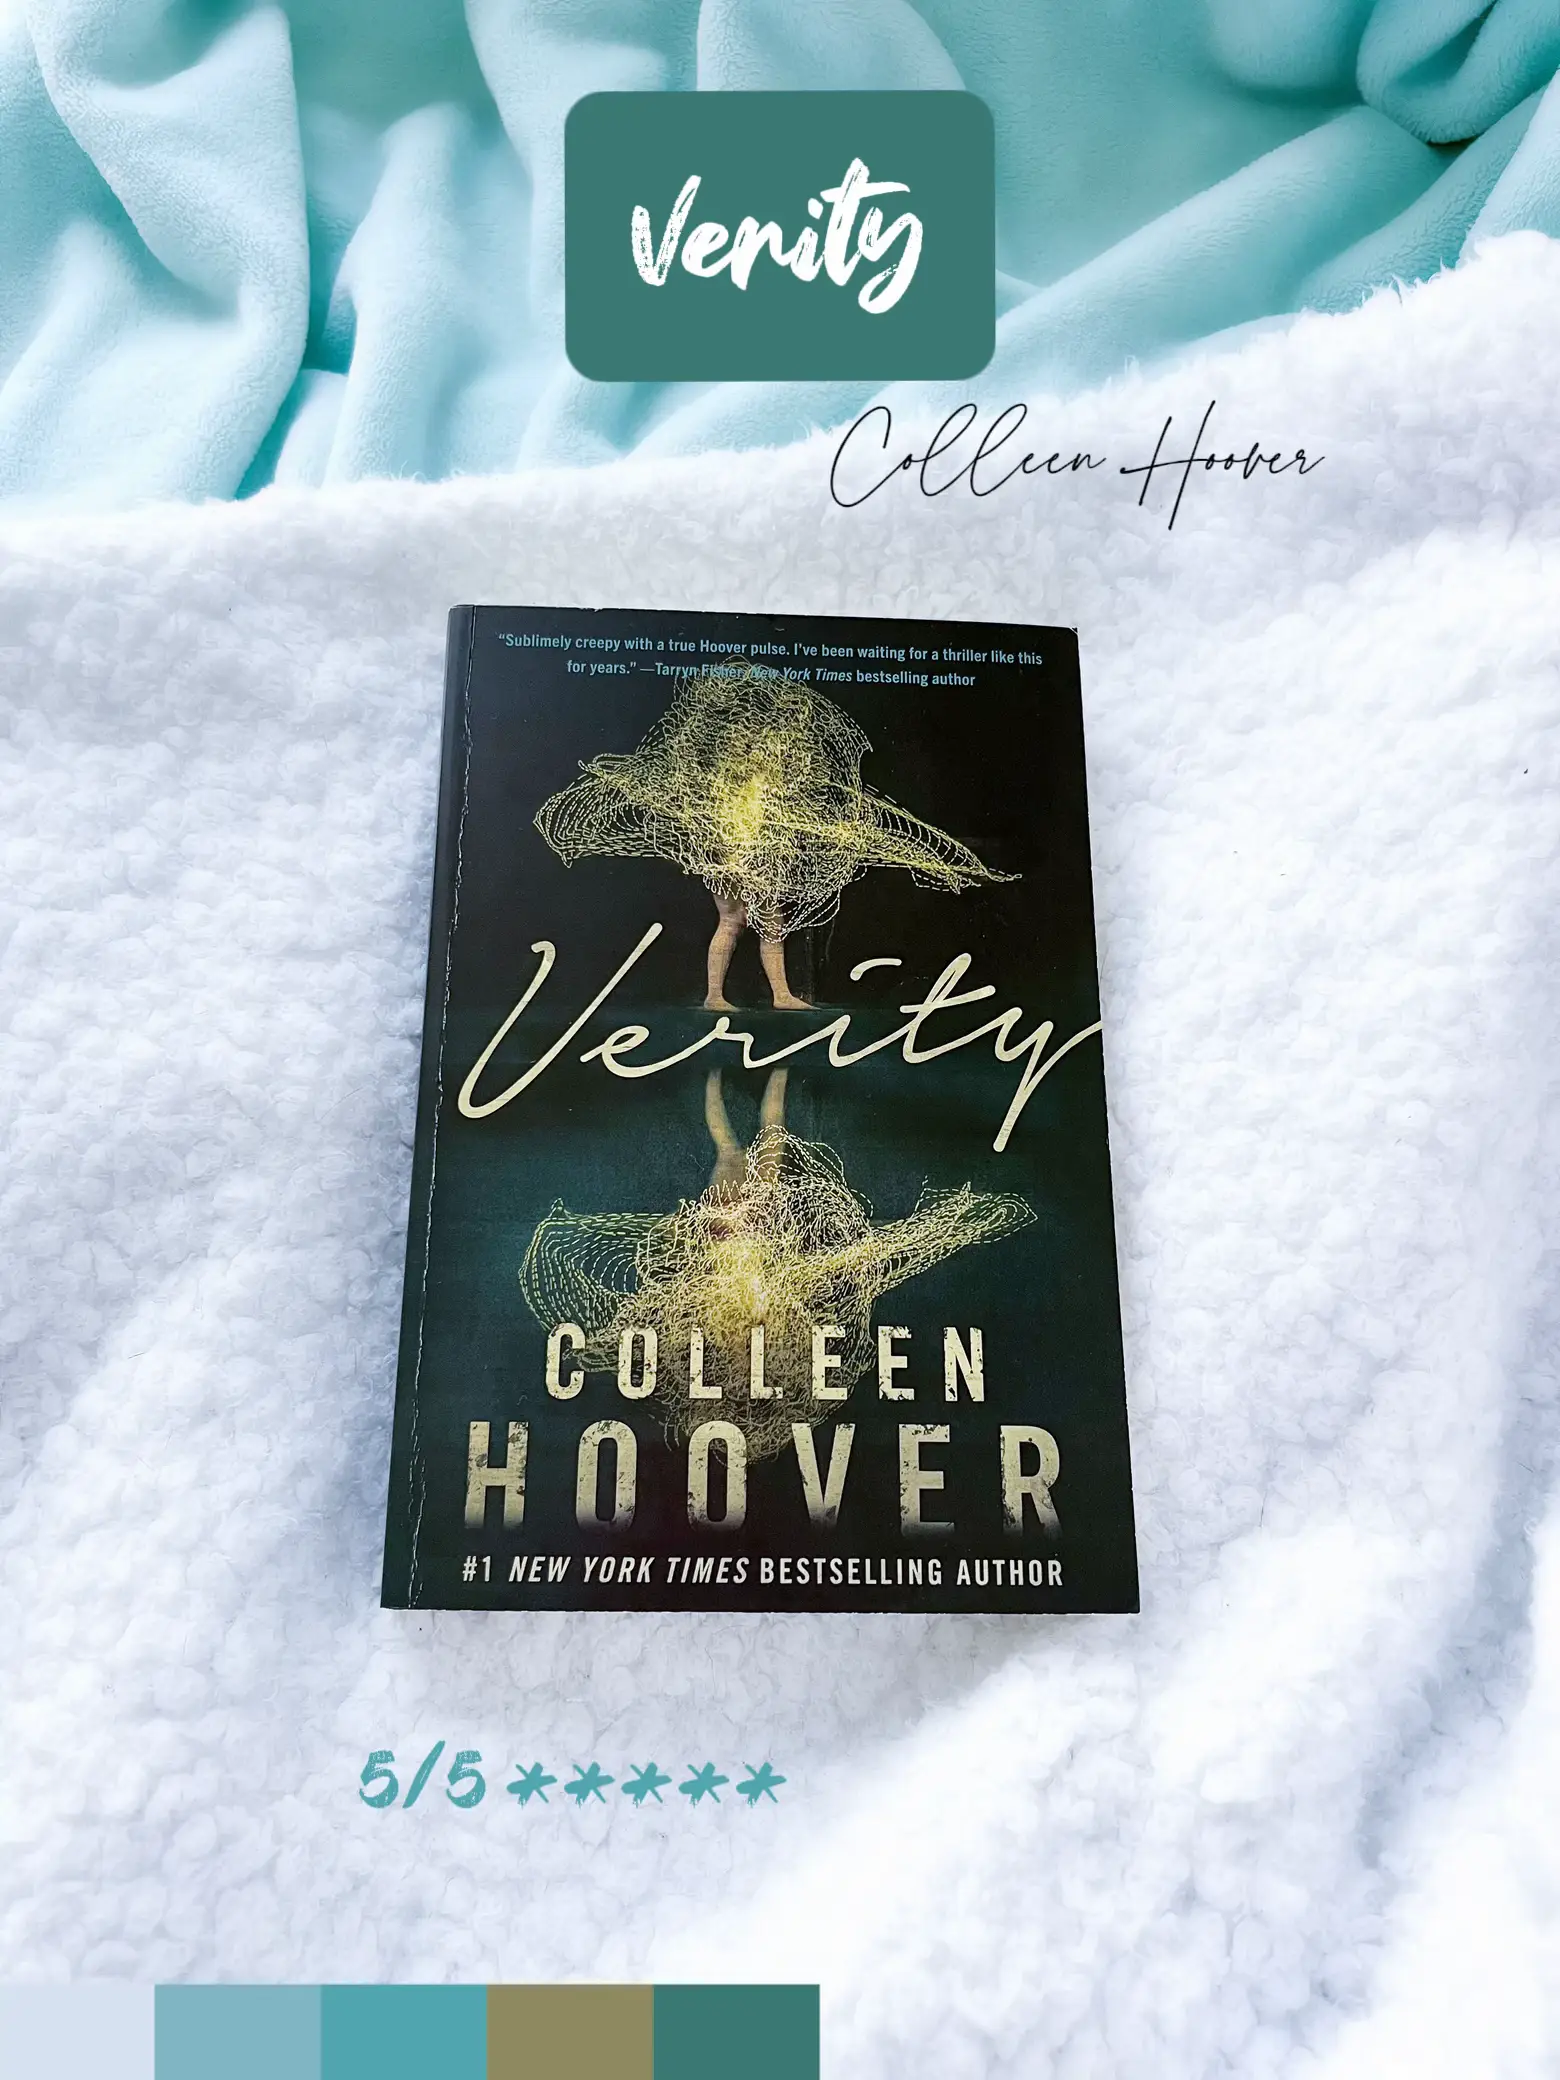 Colleen Hoover's Book, Verity Is a Thrilling and Spicey Read - My Heart  In Pen